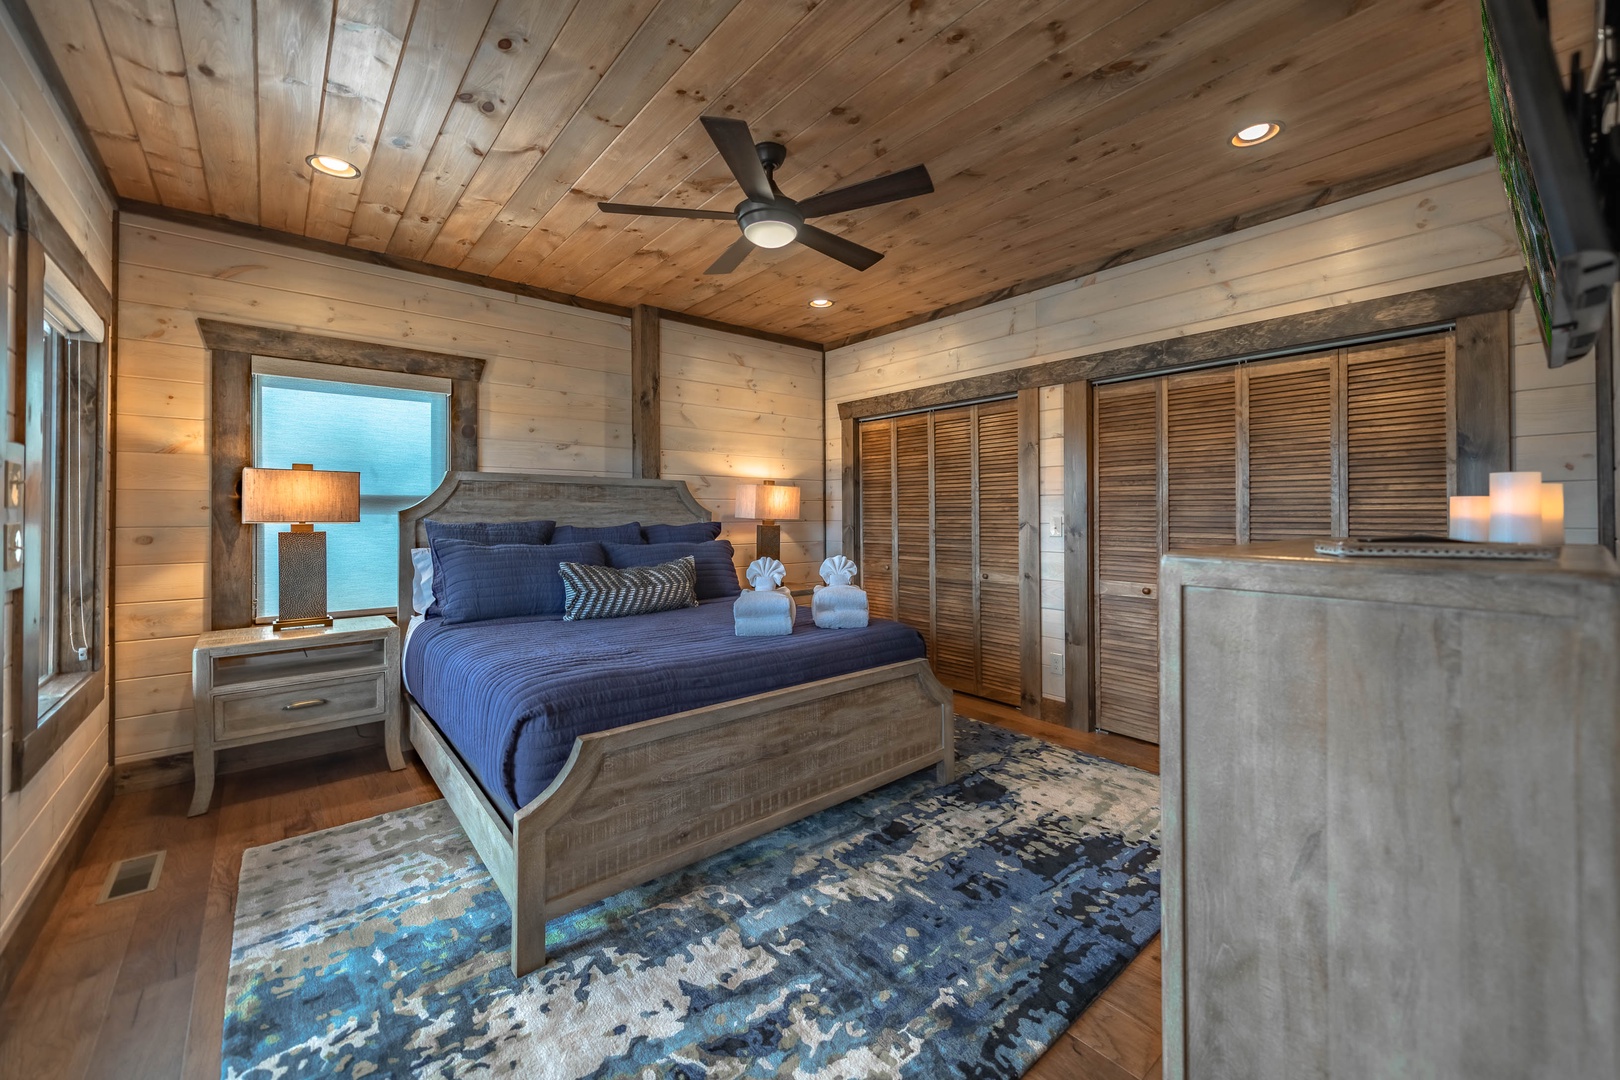 The Ridgeline Retreat- Lower level king bedroom with a mounted TV